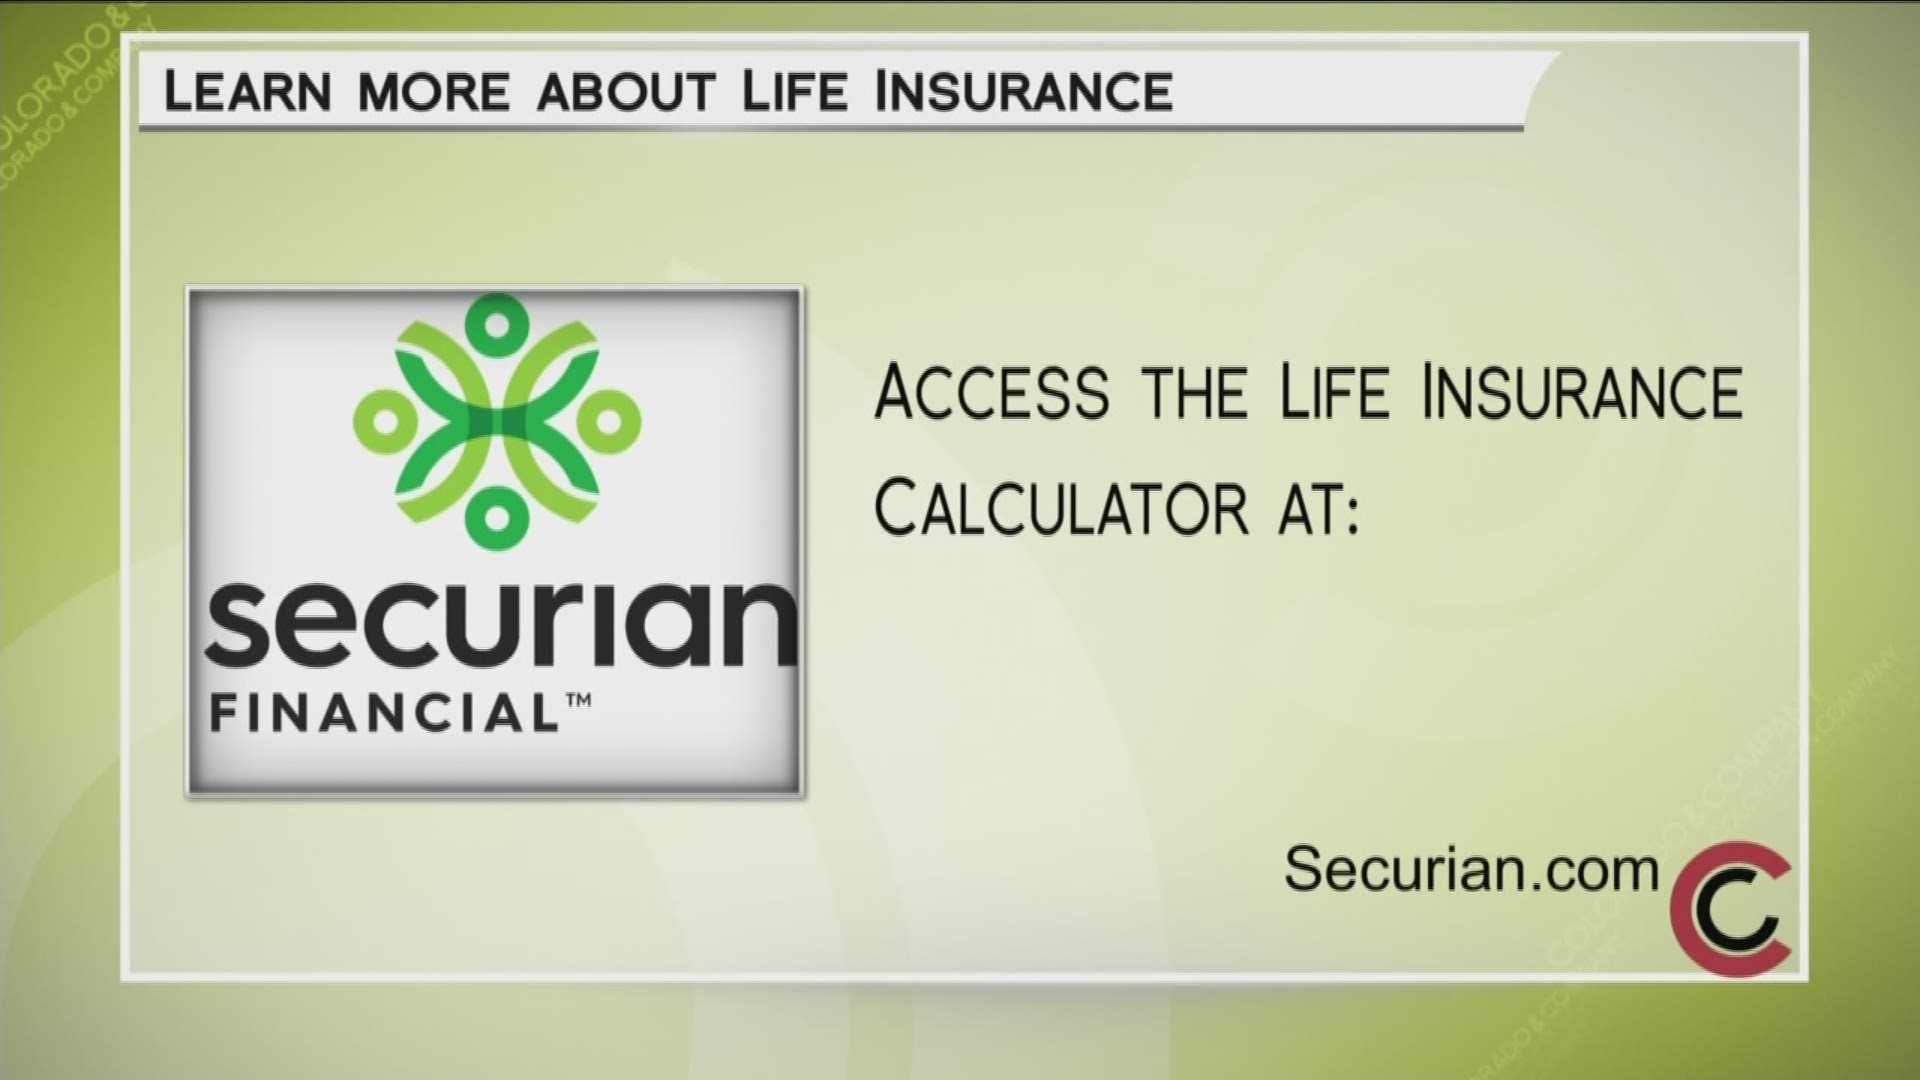 Learn more about life insurance, how much coverage you may need, and get access to the Life Insurance Calculator at www.Securian.com. 
THIS INTERVIEW HAS COMMERCIAL CONTENT. PRODUCTS AND SERVICES FEATURED APPEAR AS PAID ADVERTISING.